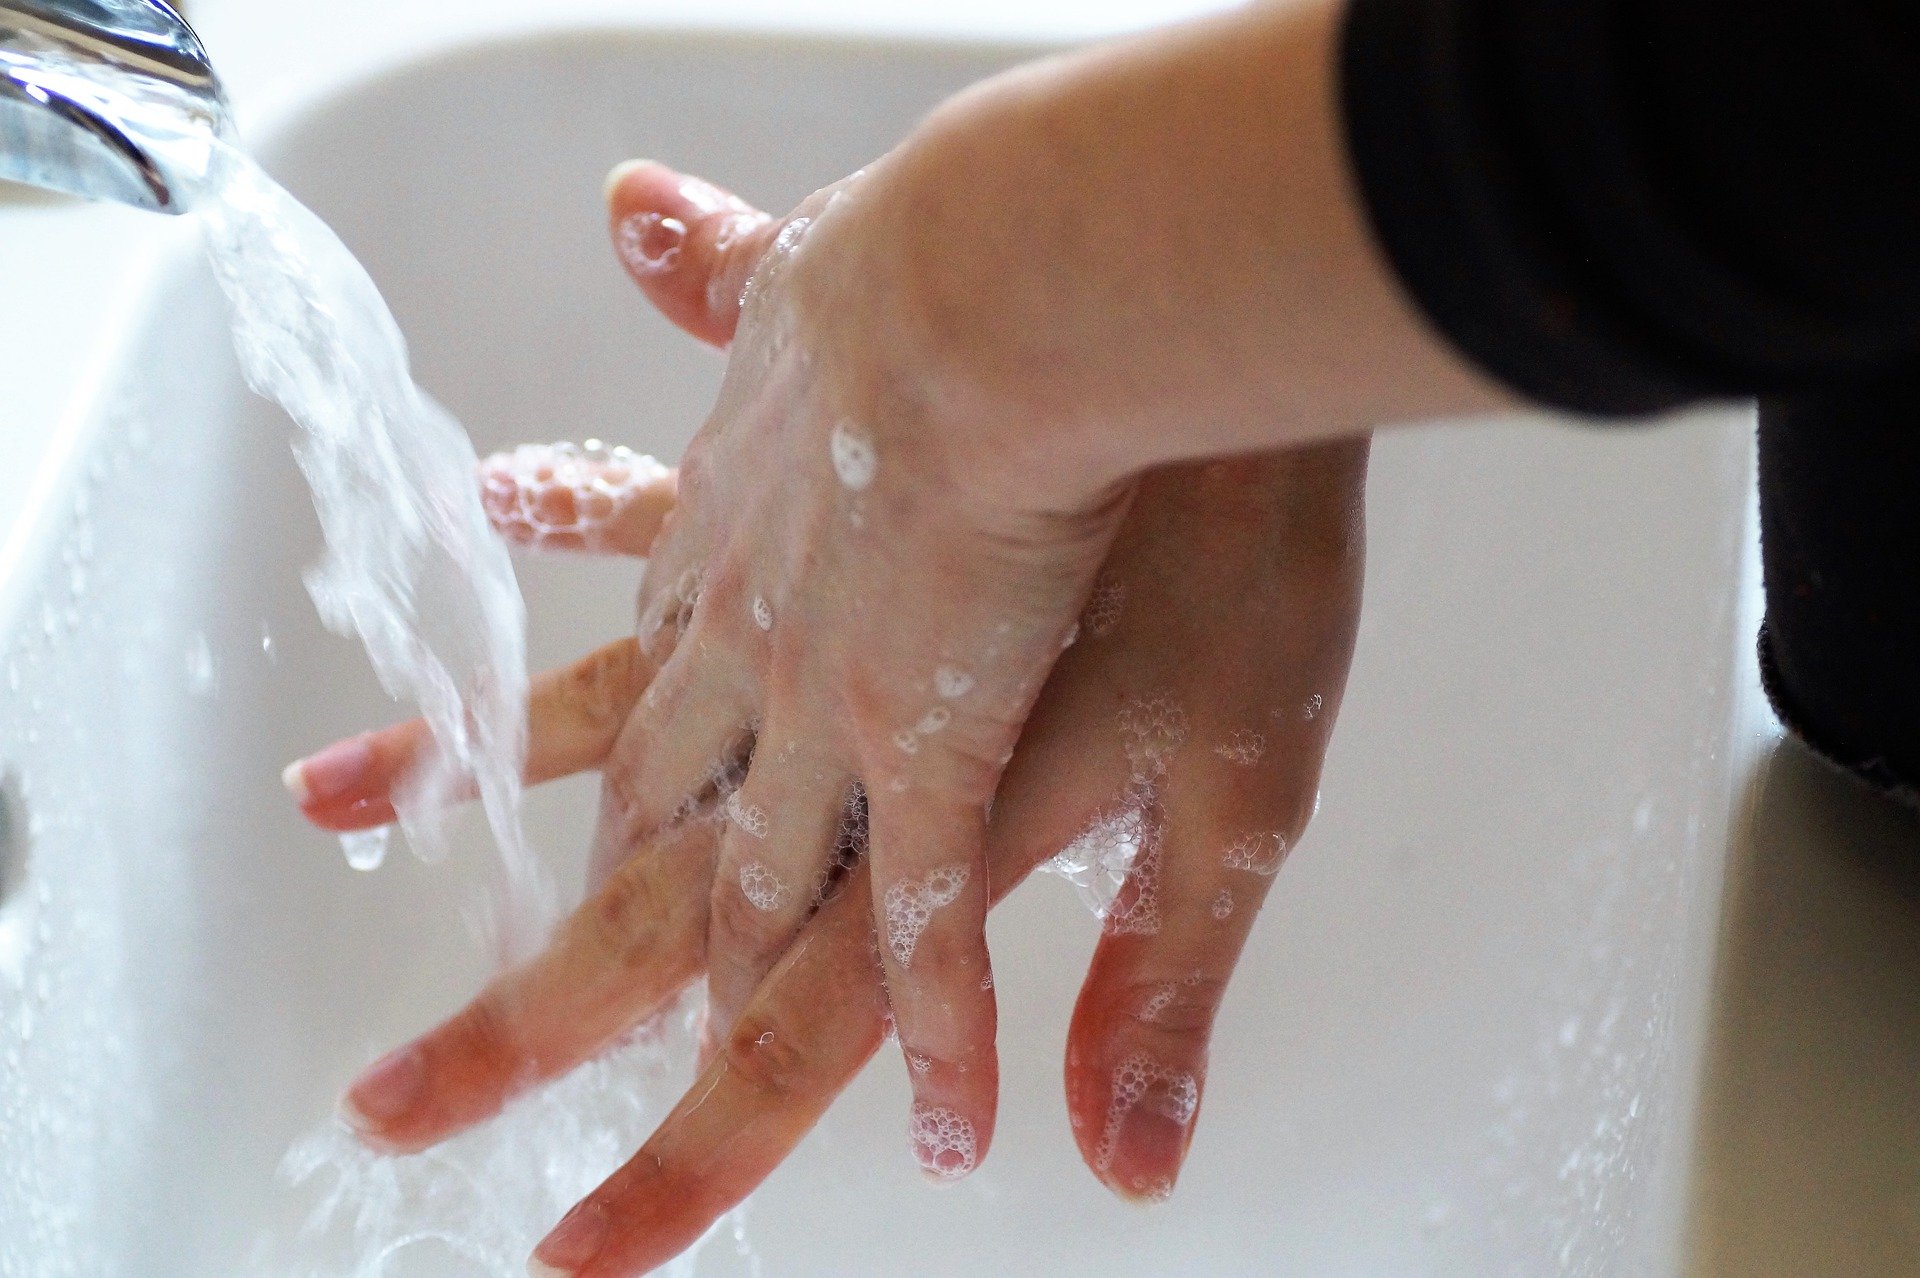 Person washing hands with soap and water